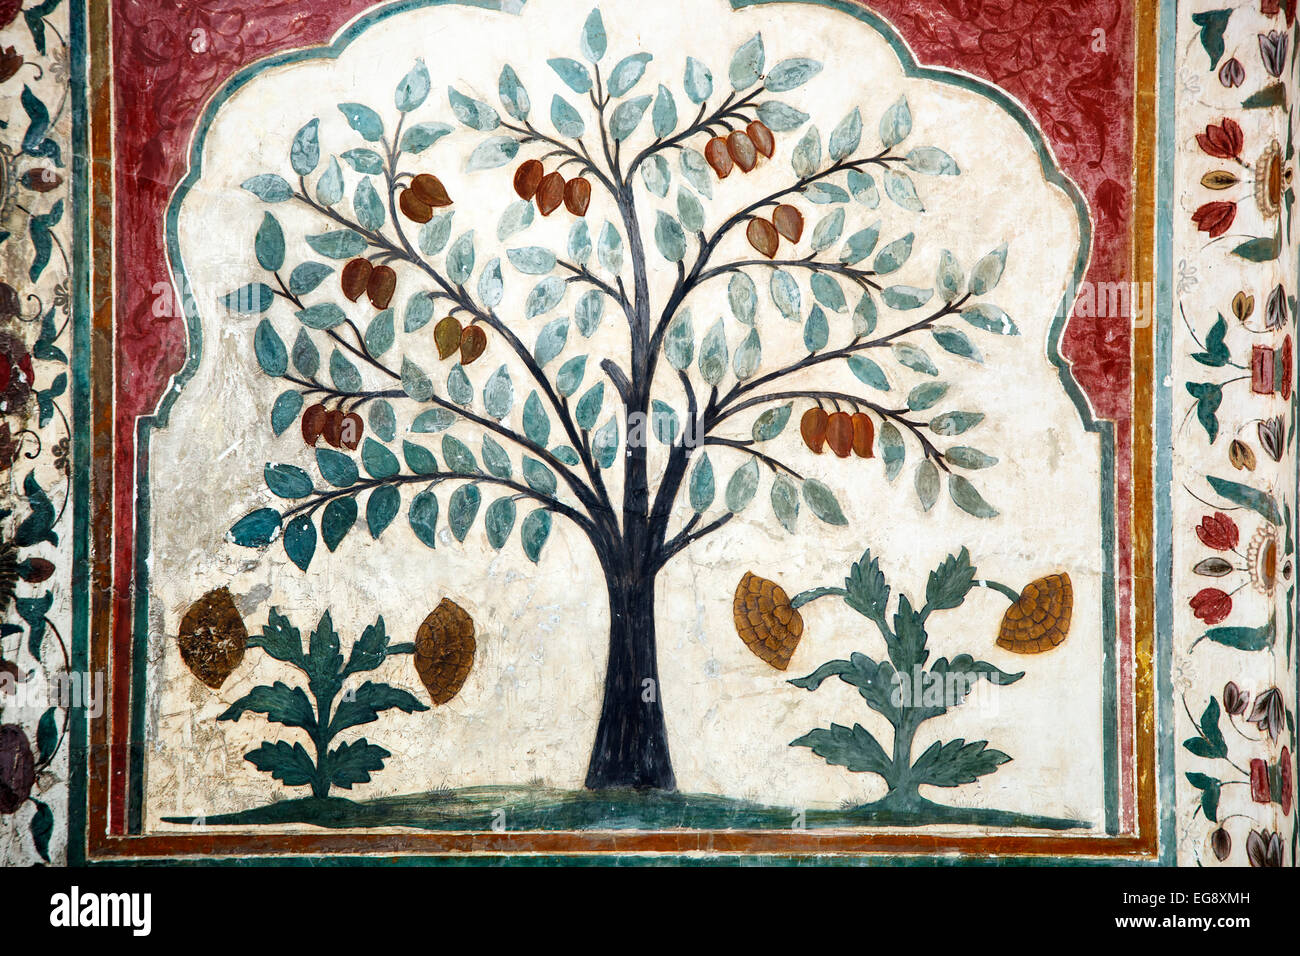 Tree wall decoration, Amber (or Amer) Fort, Jaipur, Rajasthan, India Stock Photo